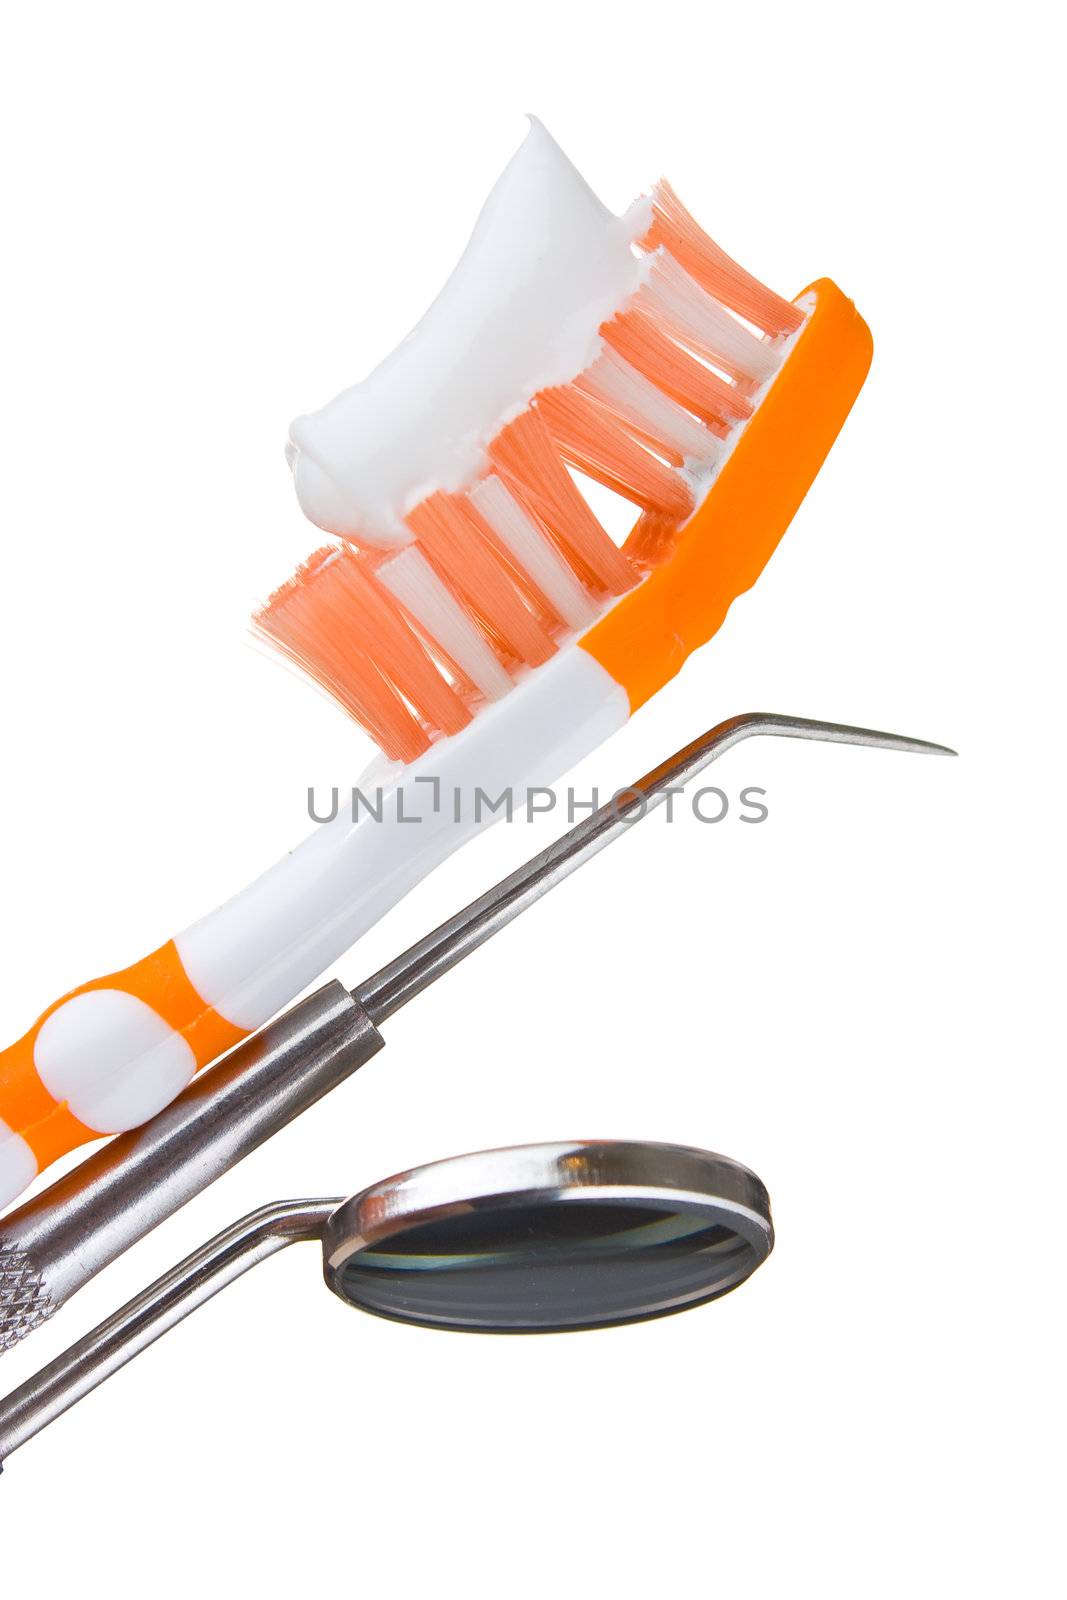 toothbrush and dental tools isolated on white background